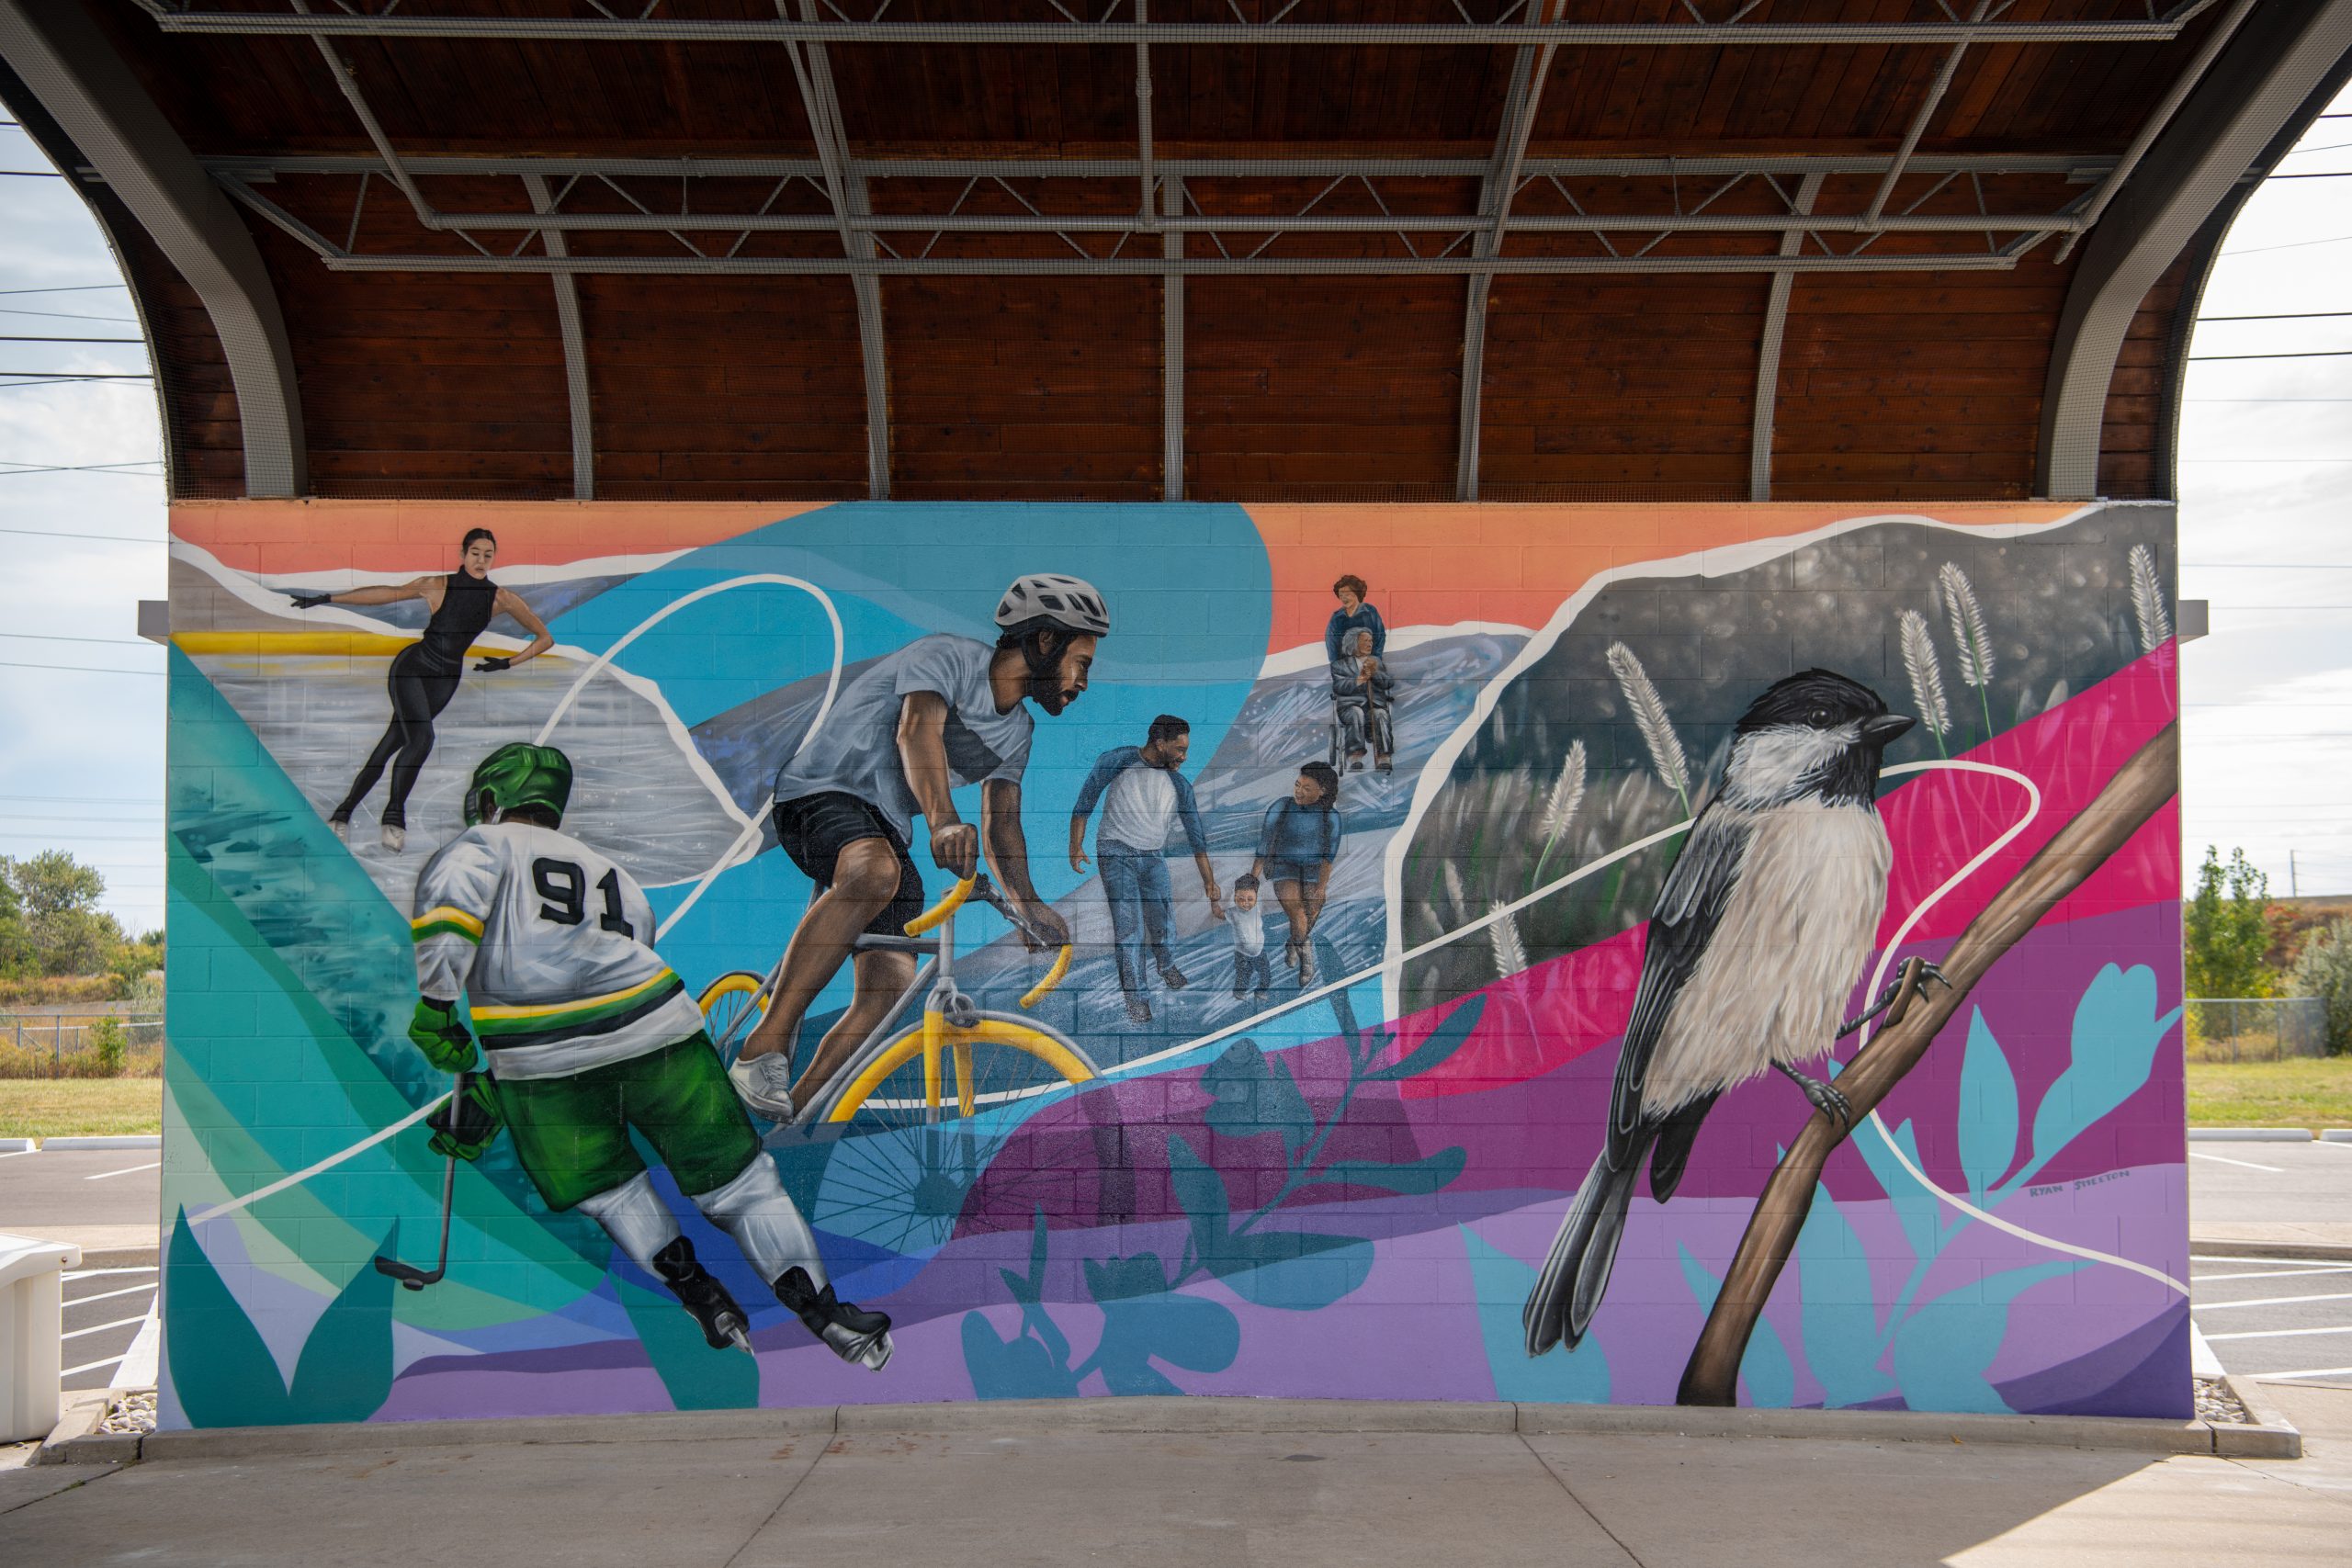 Mural with colourful depiction of athletes and nature